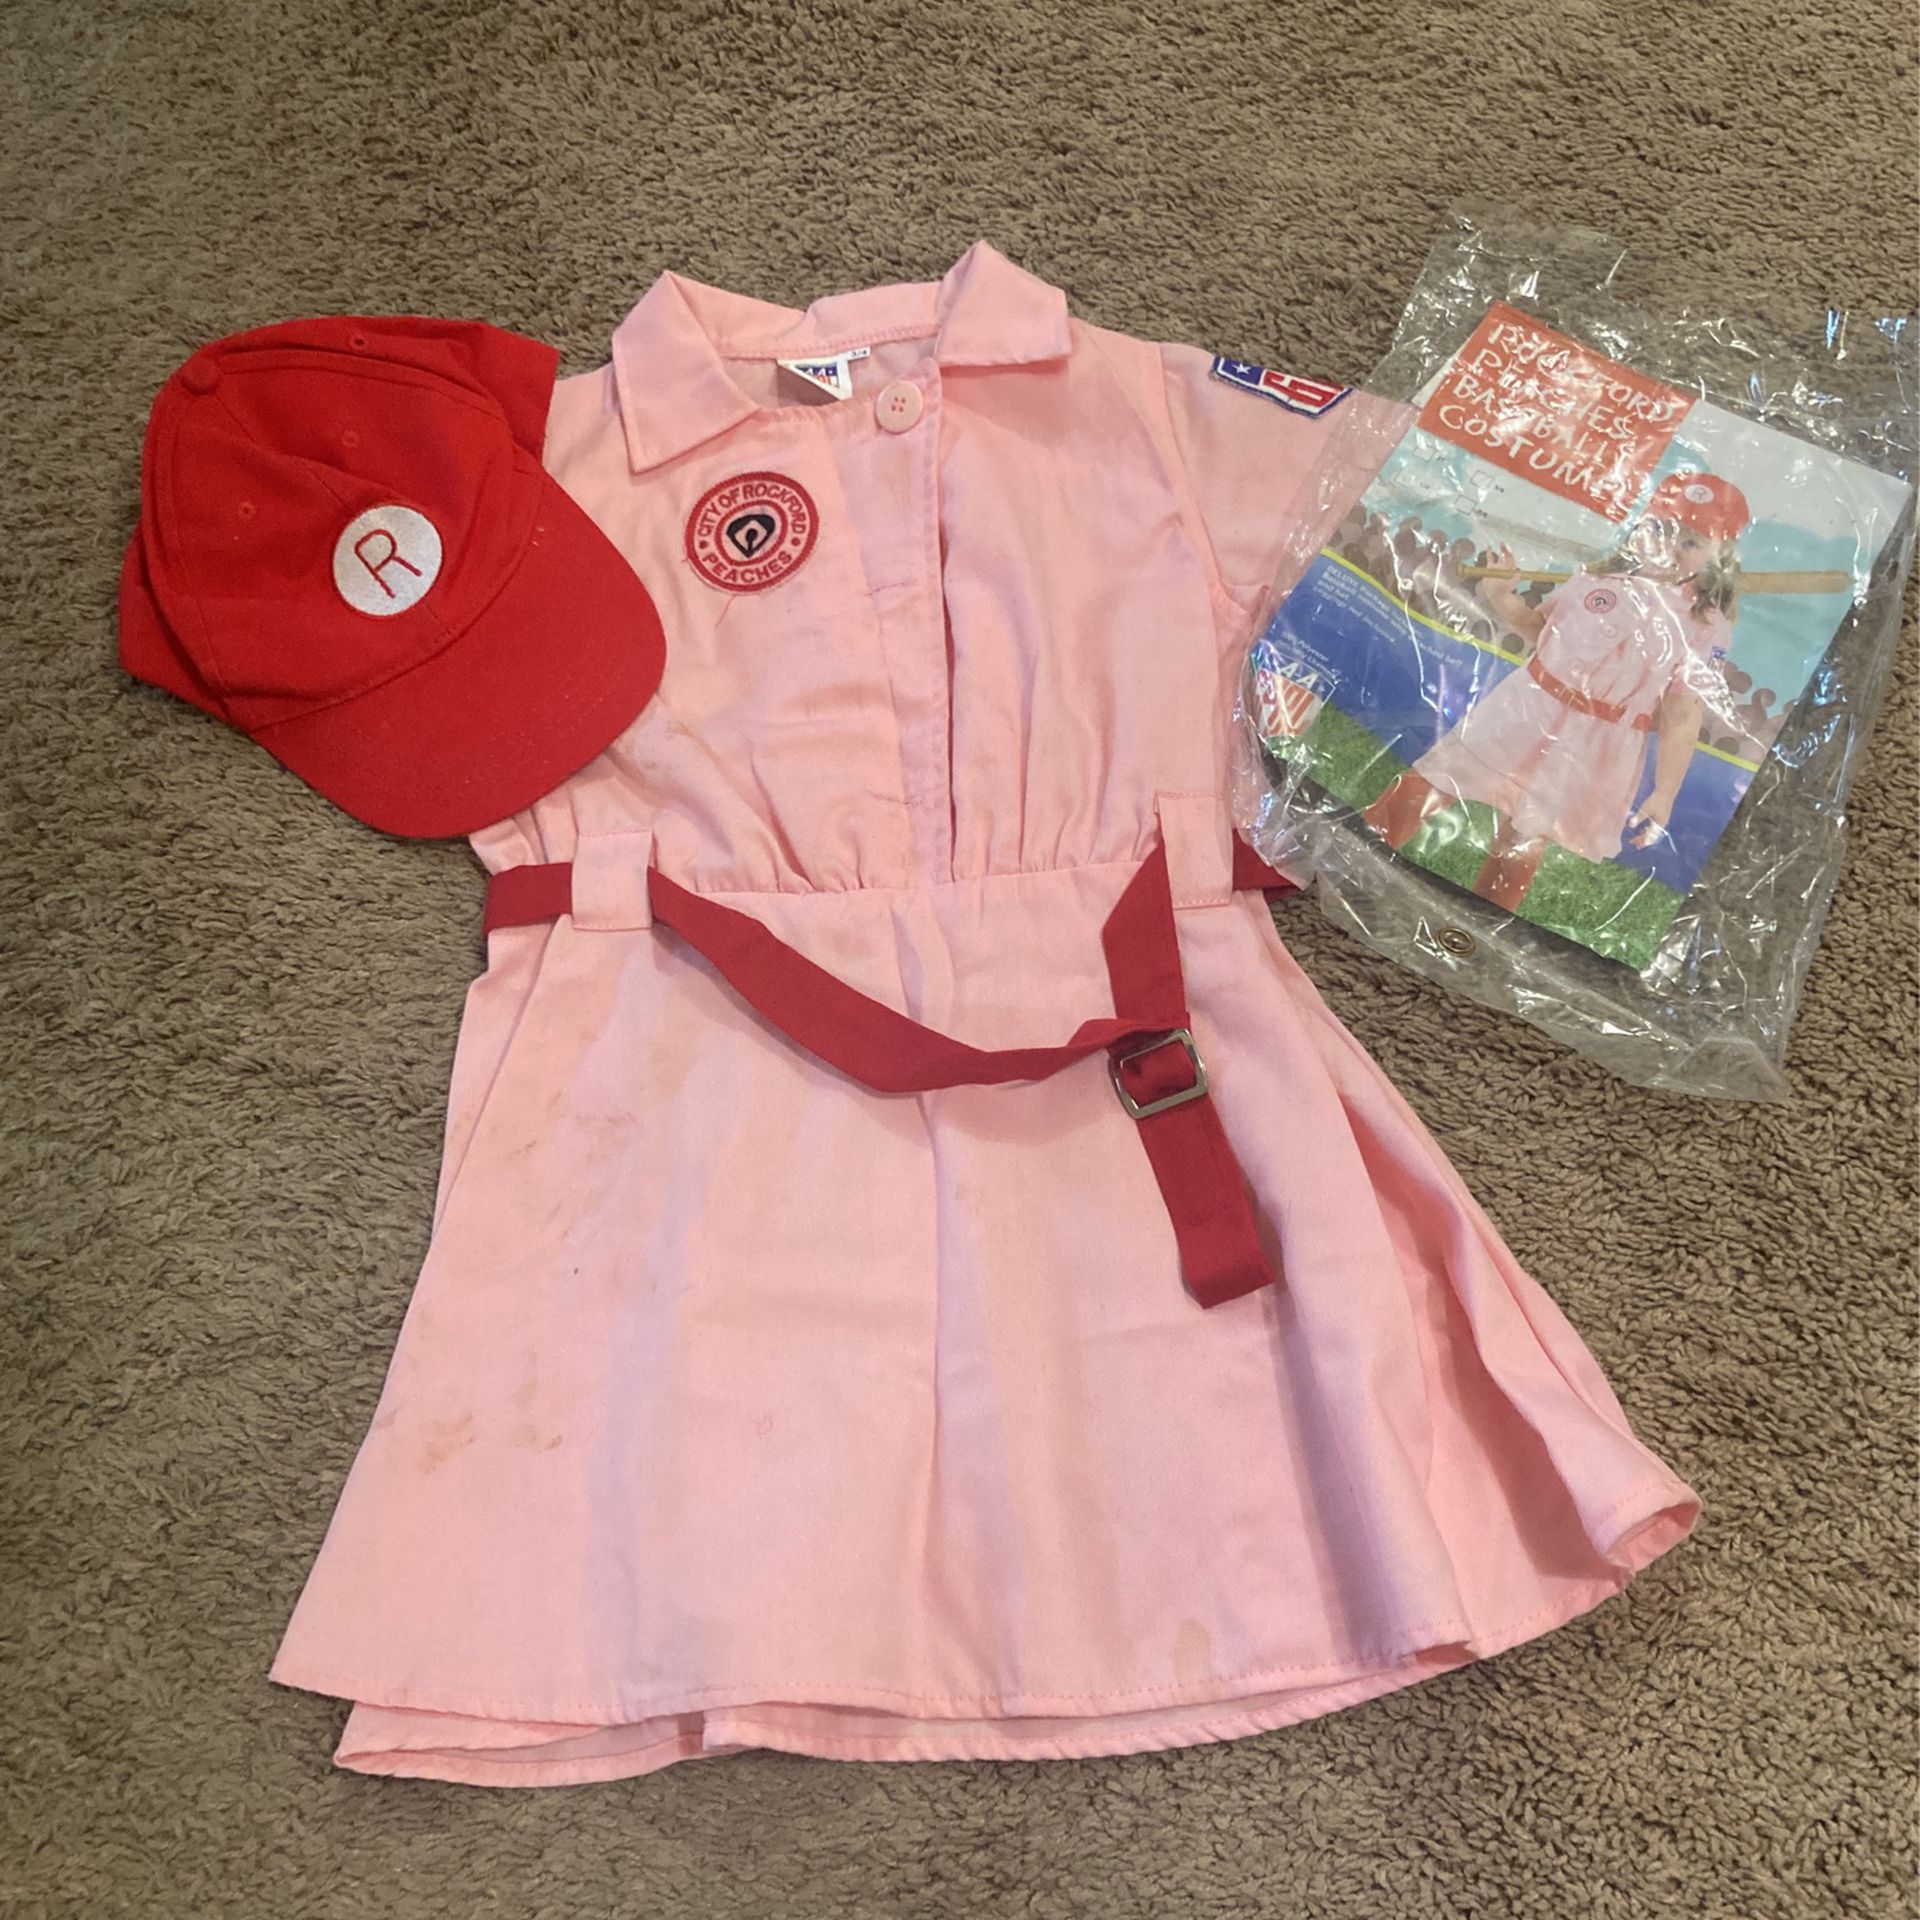 Rockford Peaches Baseball Costume Size 3-4 (toddlers) for Sale in